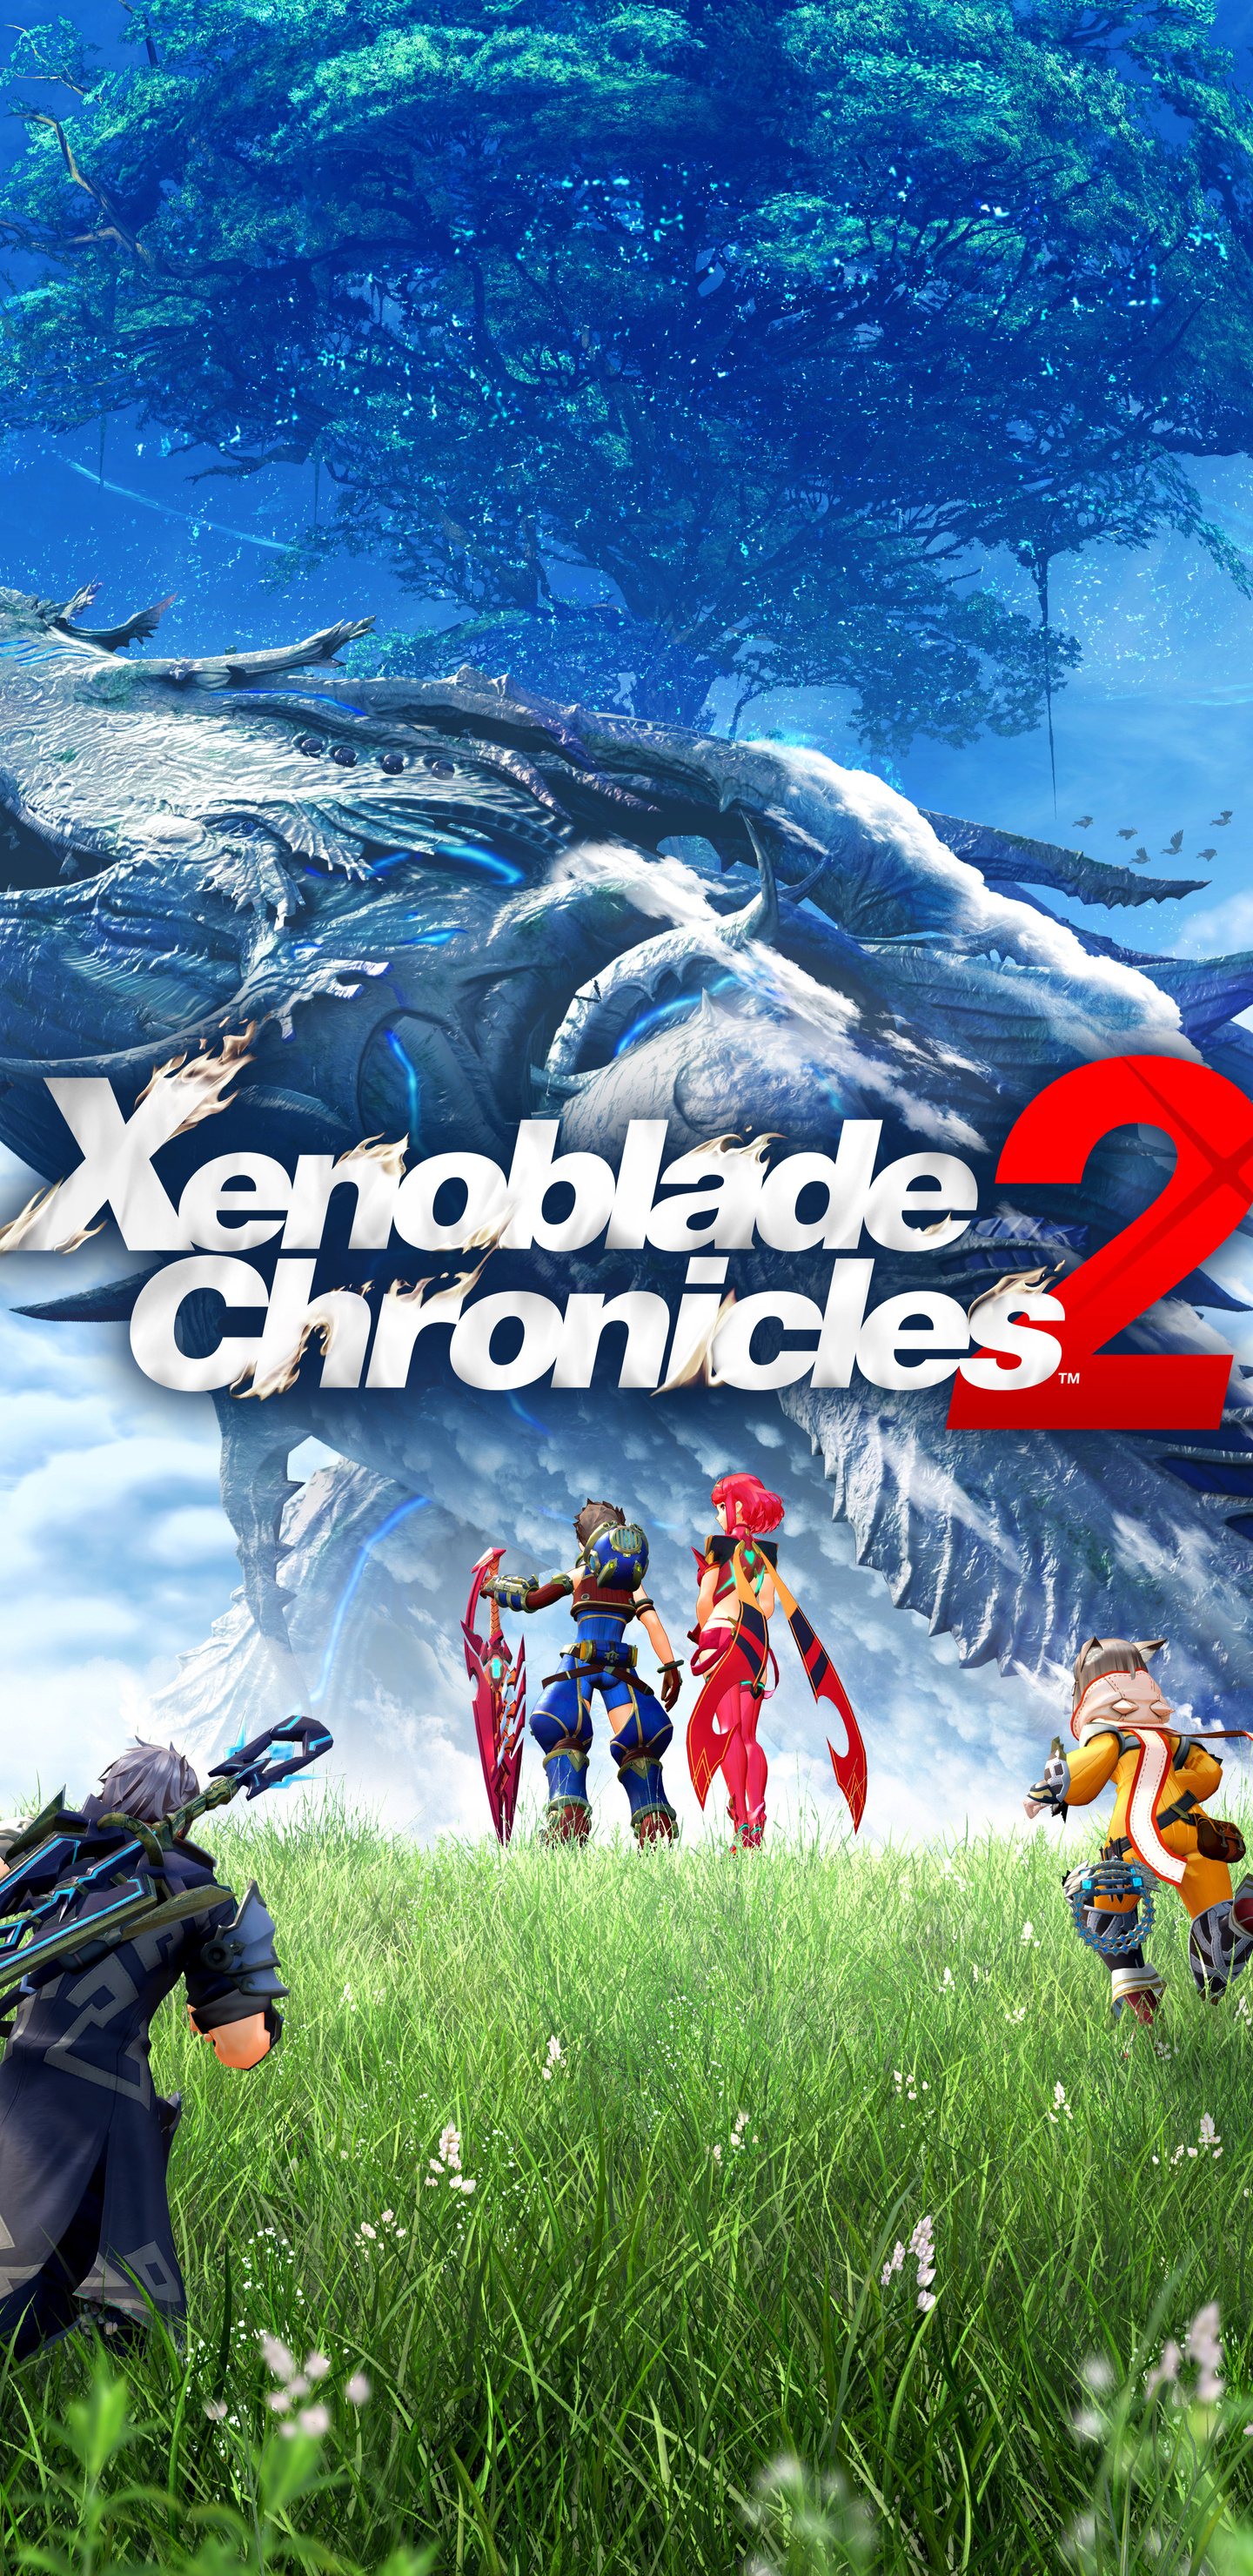 1440x2960 Xenoblade Chronicles 2 Samsung Galaxy Note 9,8, S9,S8,S8+ QHD HD 4k Wallpapers, Images, Backgrounds, Photos and Pictures